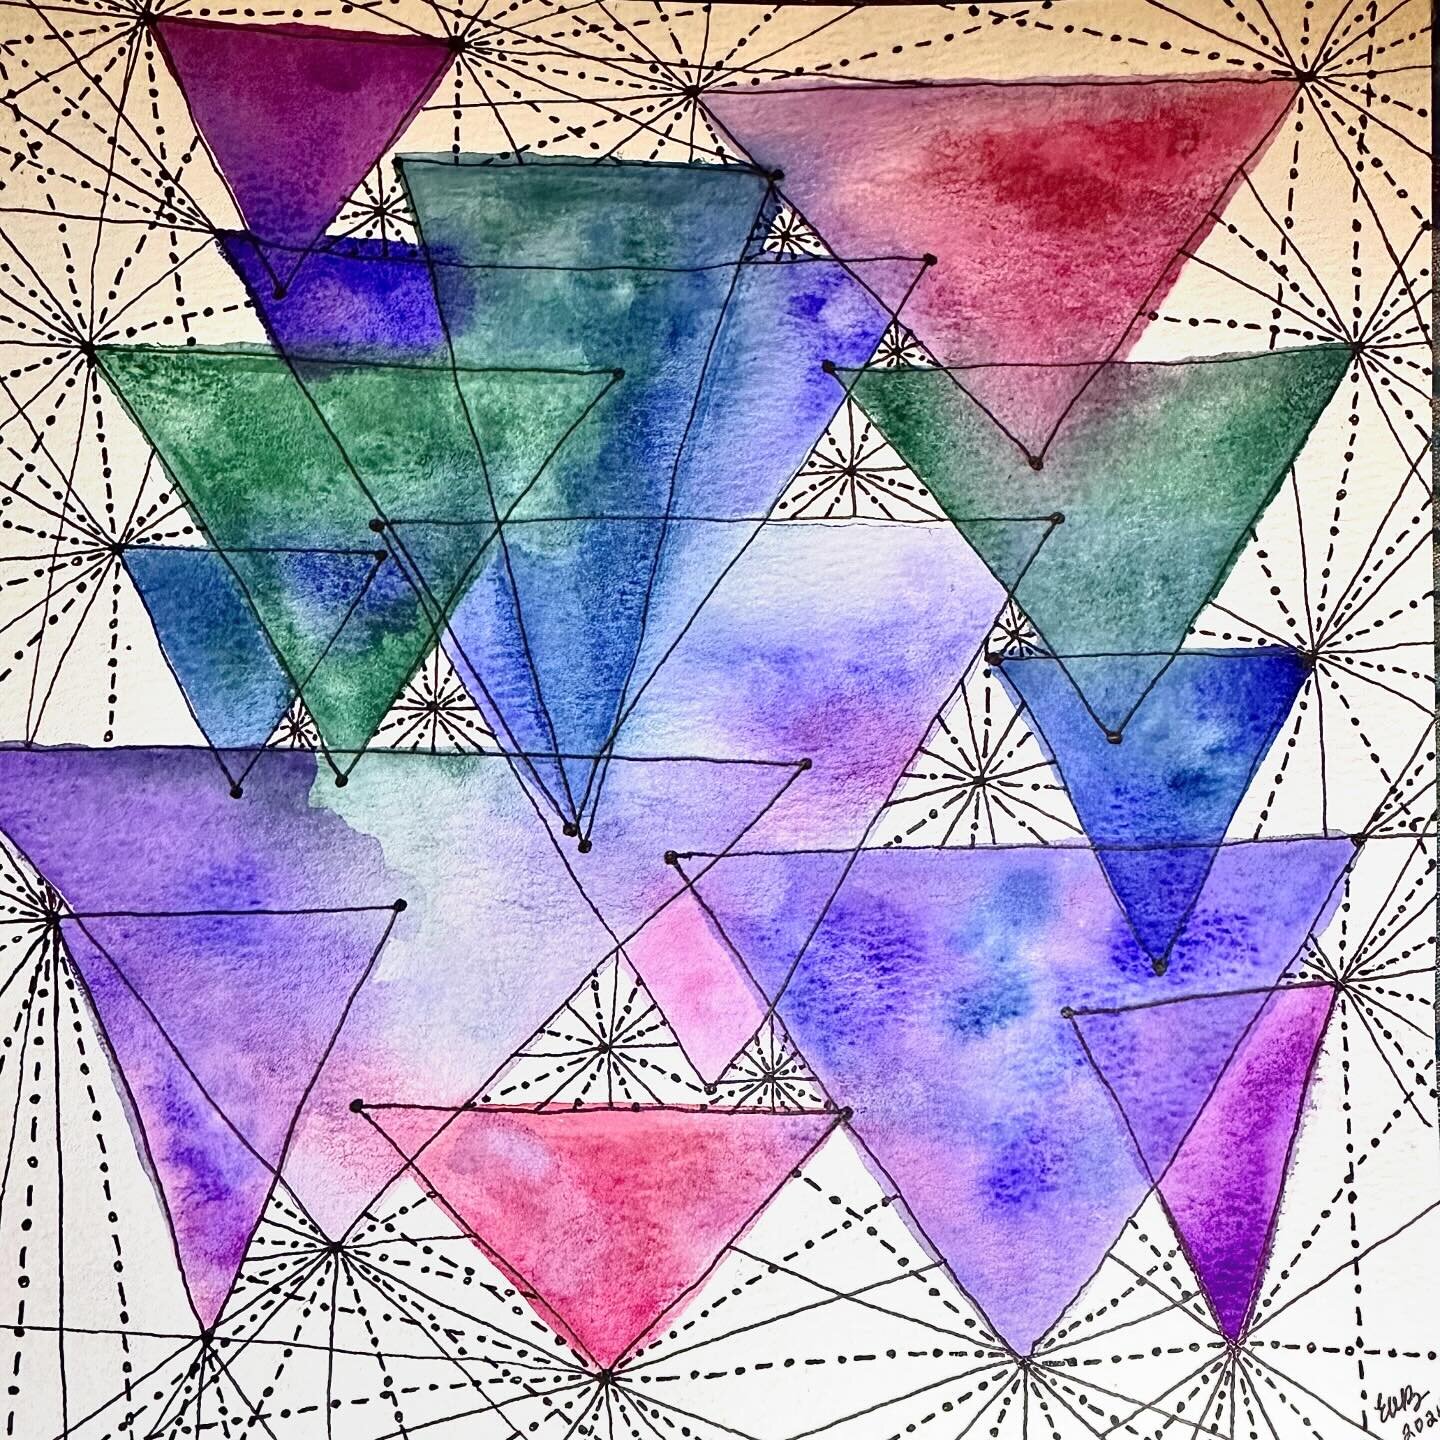 In the evenings, I have been doing artwork before bed to help my brain and have really enjoyed the process. I&rsquo;m watercolor painting abstract shapes and then I take an ink pen and draw it out&hellip; trace the shapes, and then add in tiny doodle